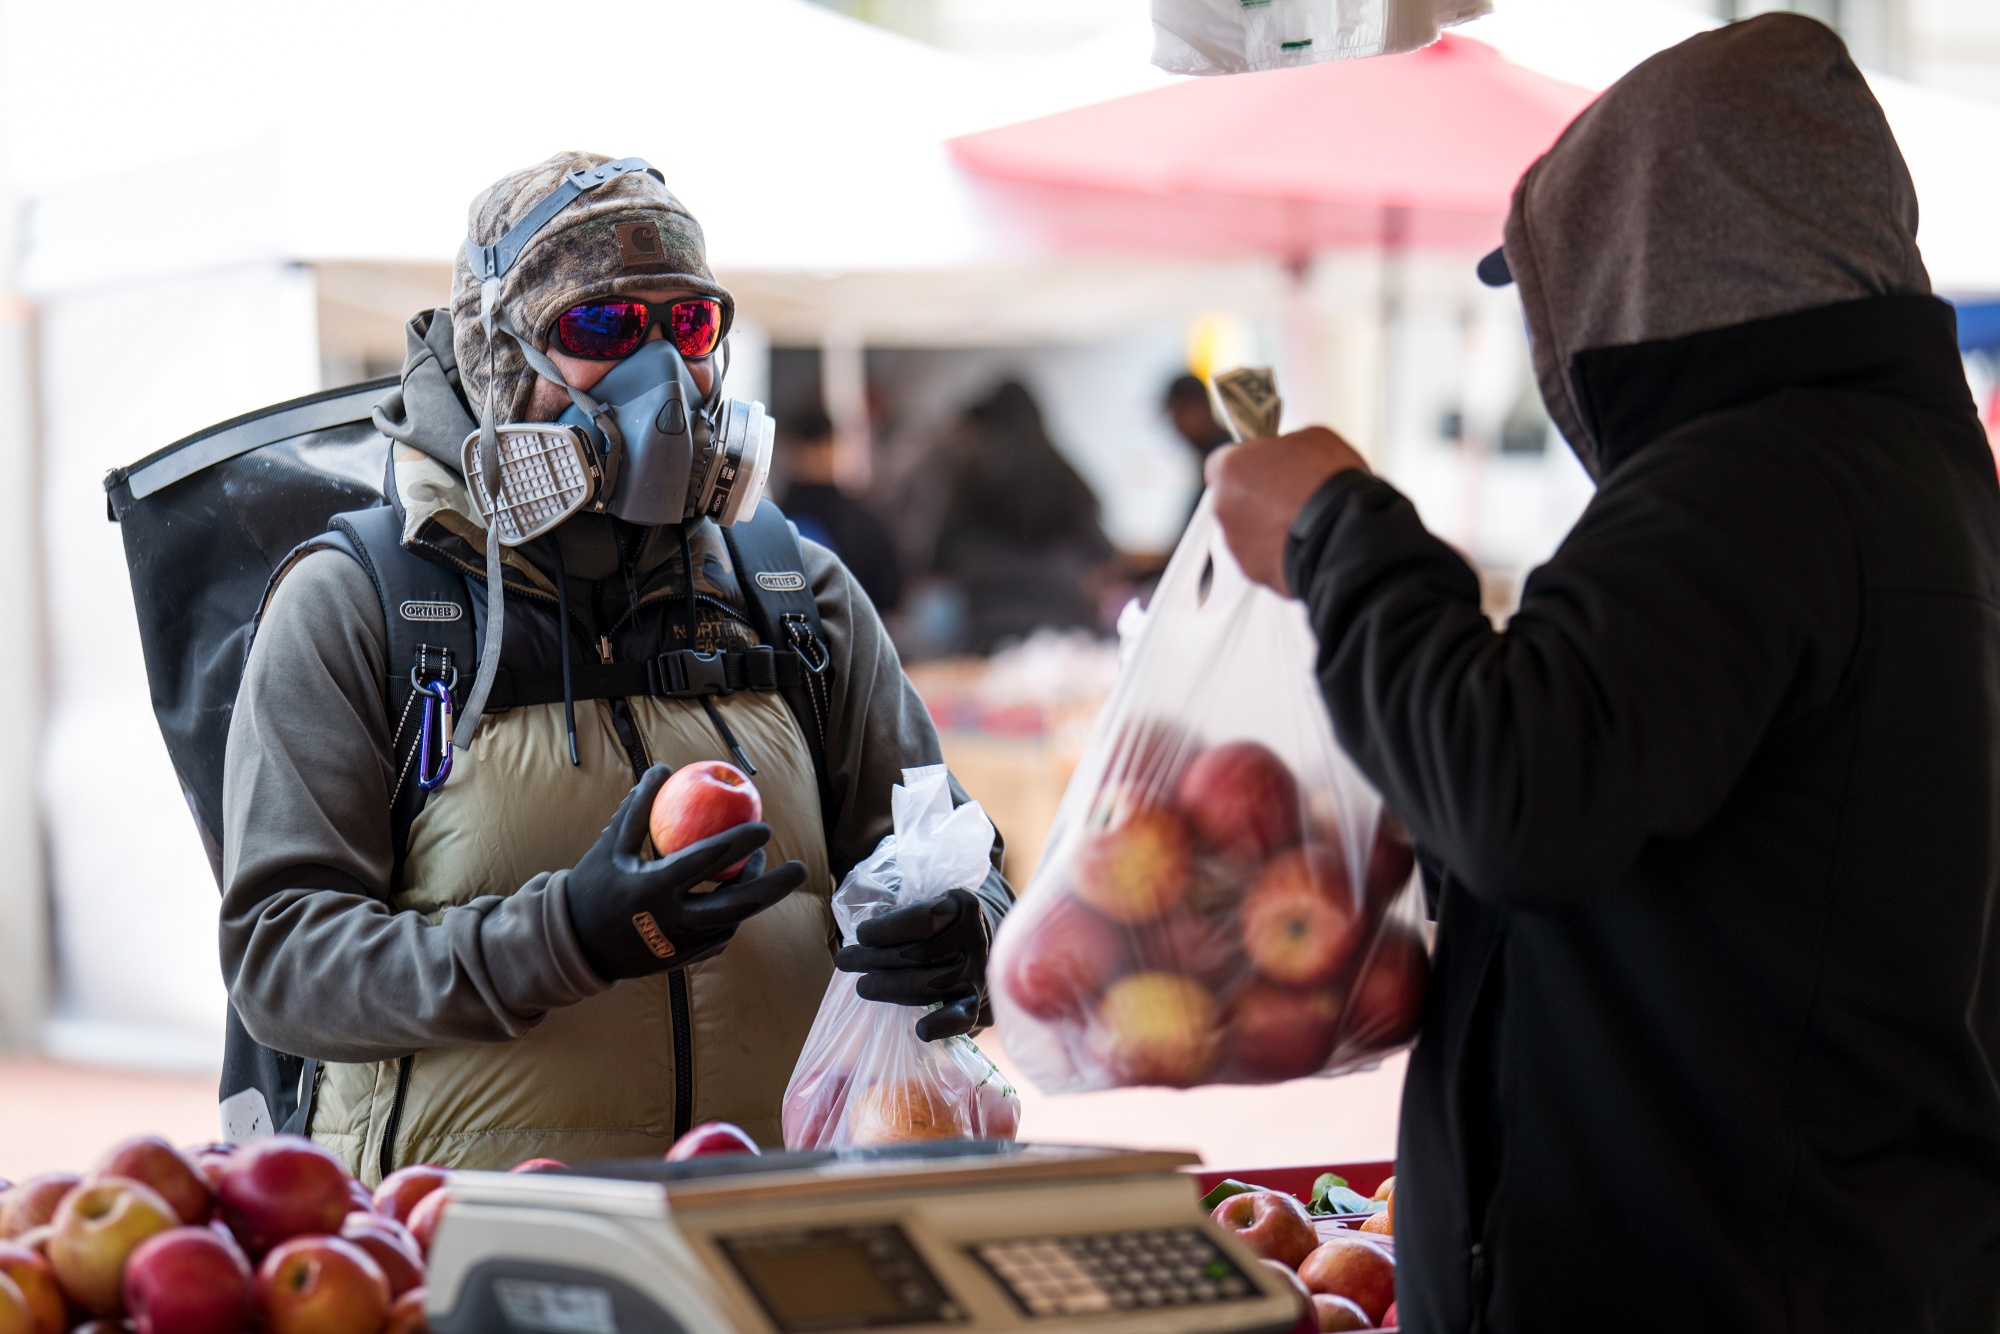 A customer buys apples at a farmers’ market in San Francisco on March 25.